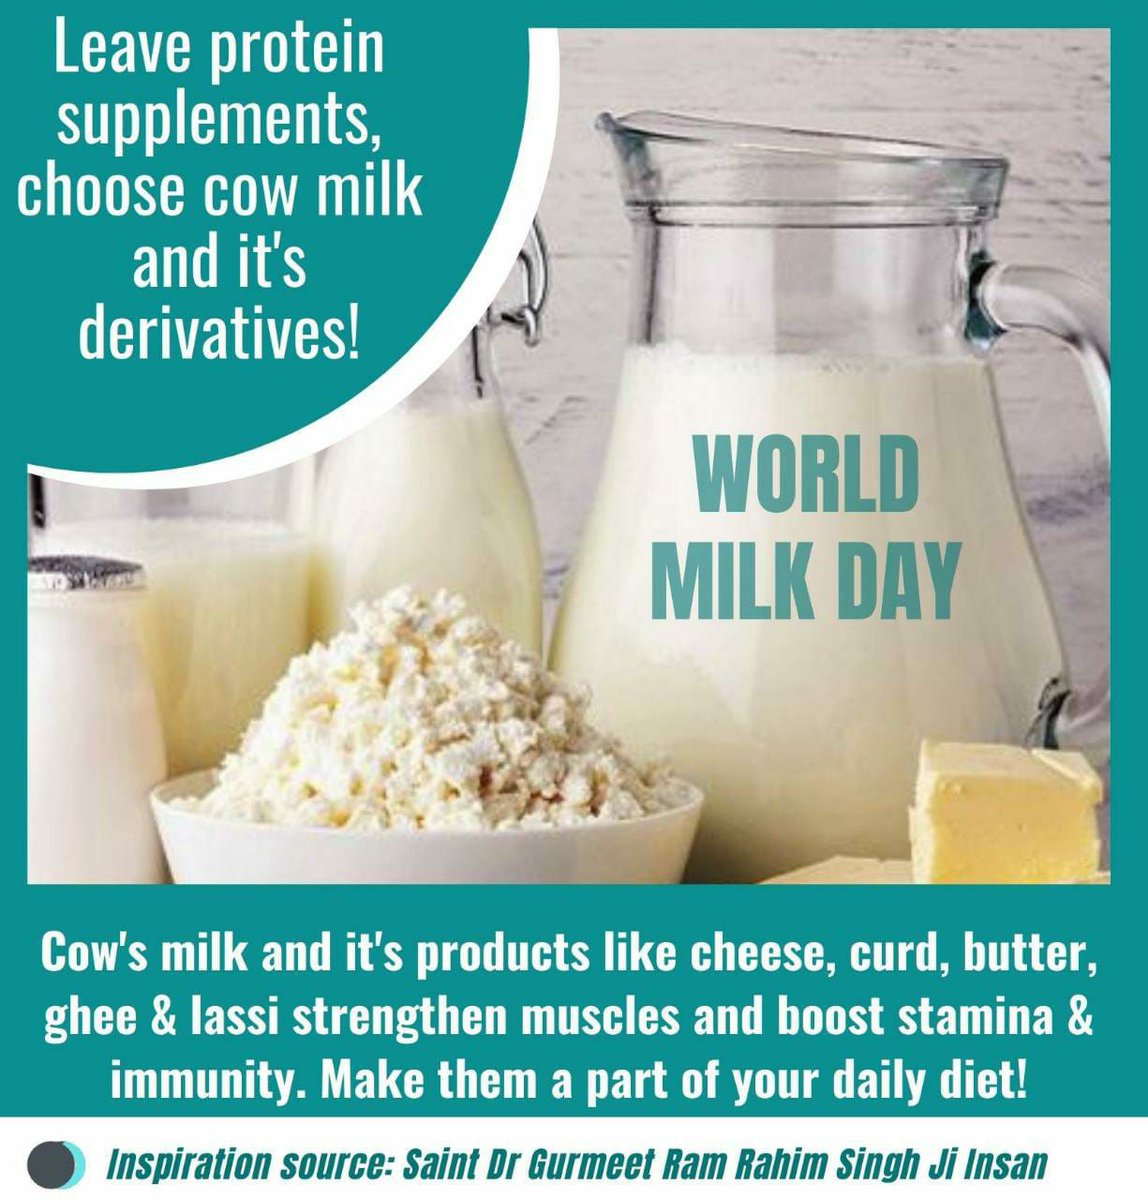 #WorldMilkDay2022 
Millons of celebrates their special #WorldMilkDay occasion by #CowMilkParty and #EnjoyDairy because of its many health benefits like providing strength and various nutrients, this pious teaching given by Spiritual Master Saint Gurneet Ram Rahim Ji.